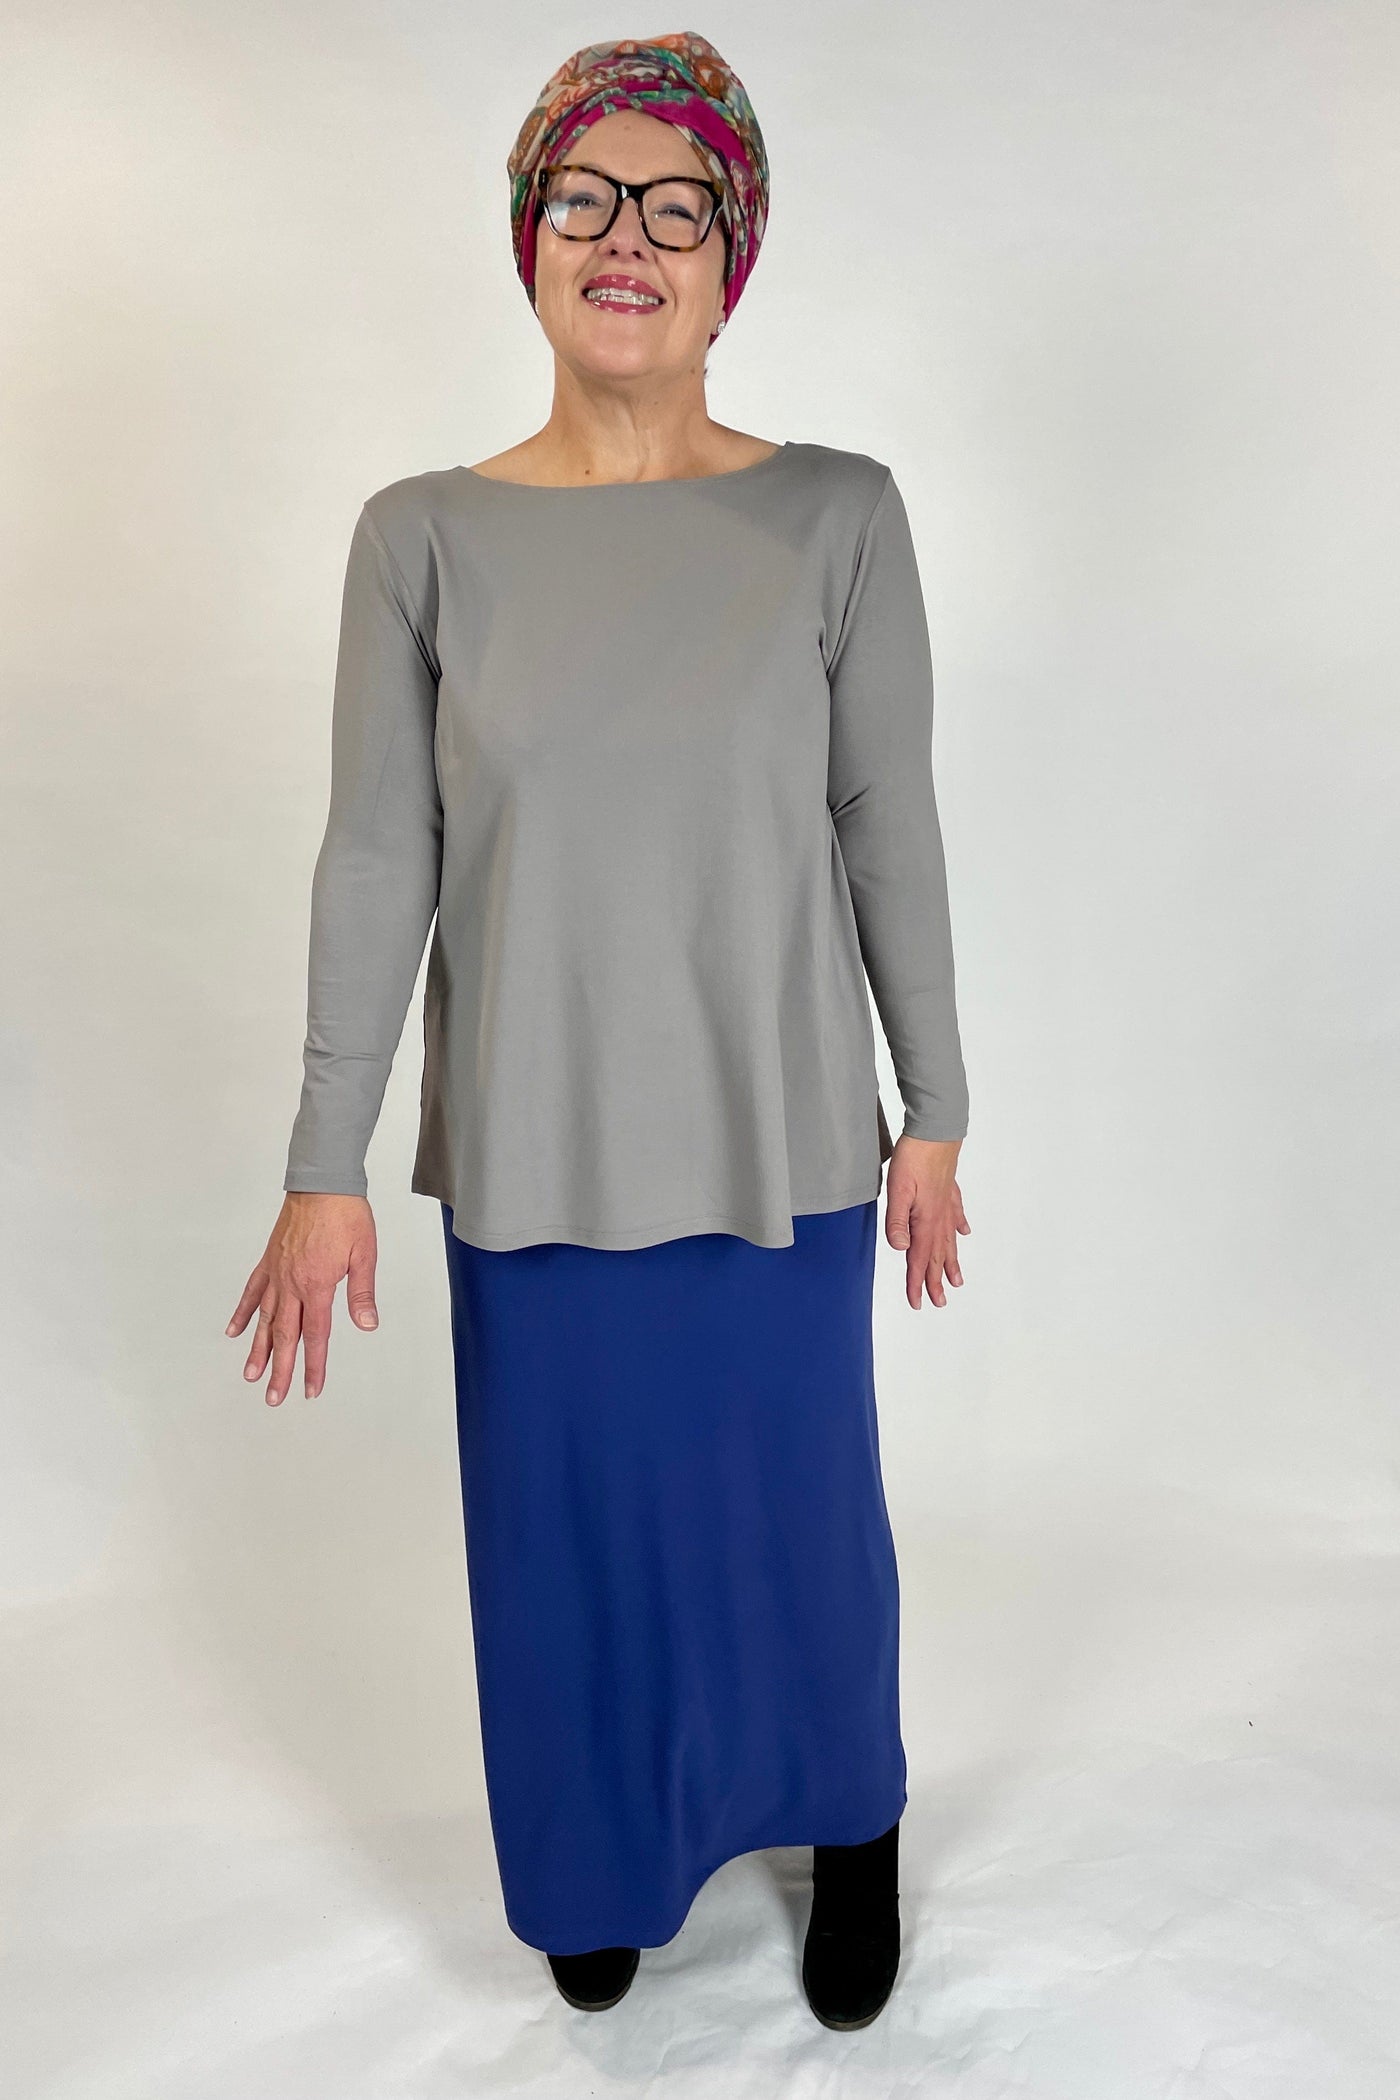 WEYRE Top relaxed boat top dove grey